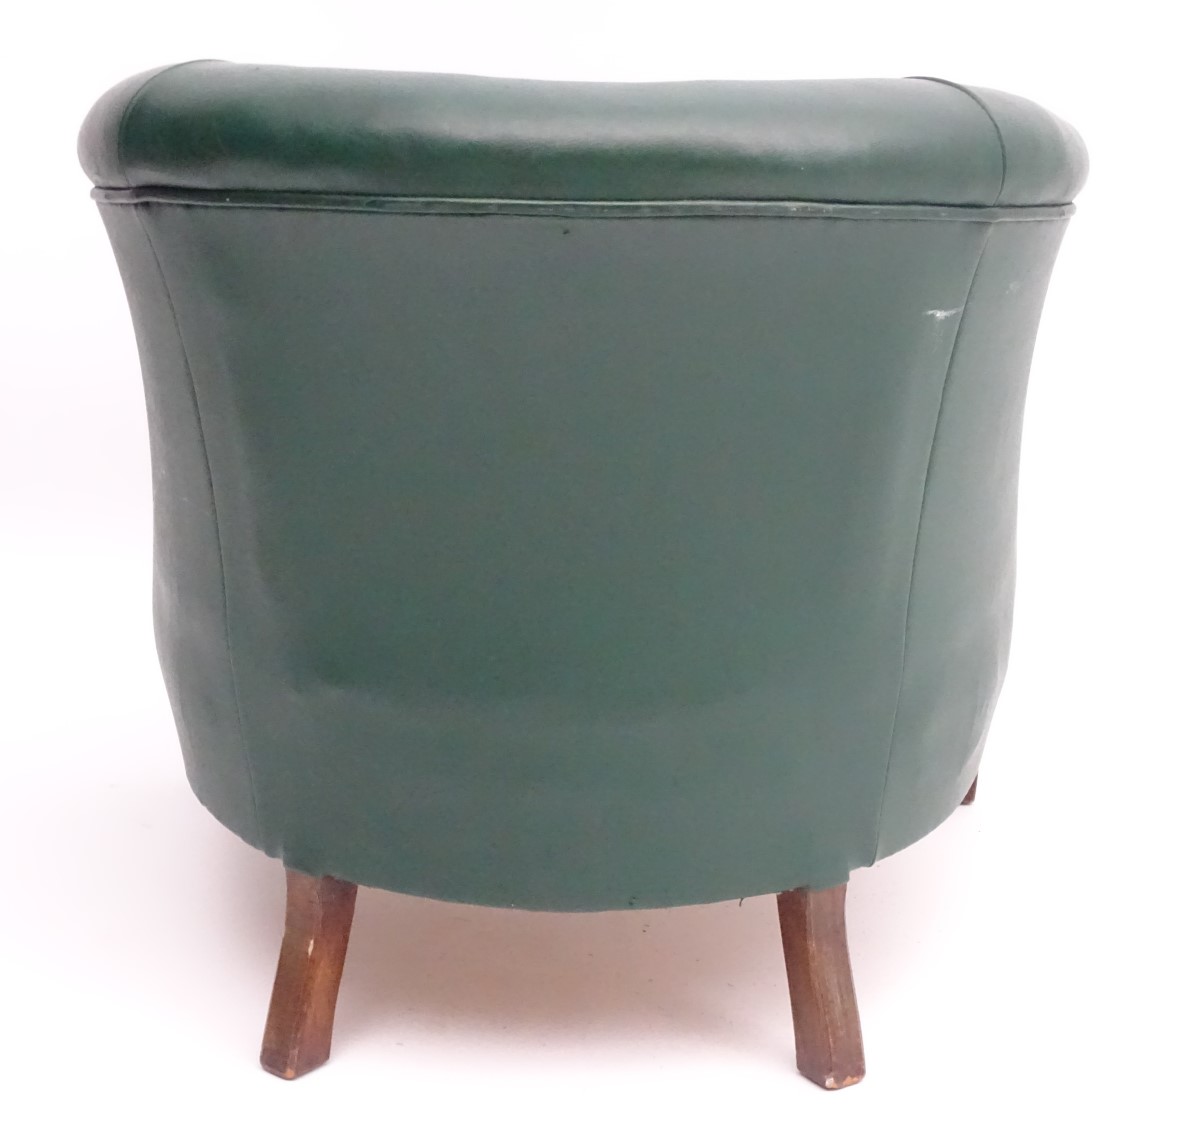 A mid 20thC green tub chair standing on squared tapering legs. 28” wide x 25” deep. - Image 2 of 4